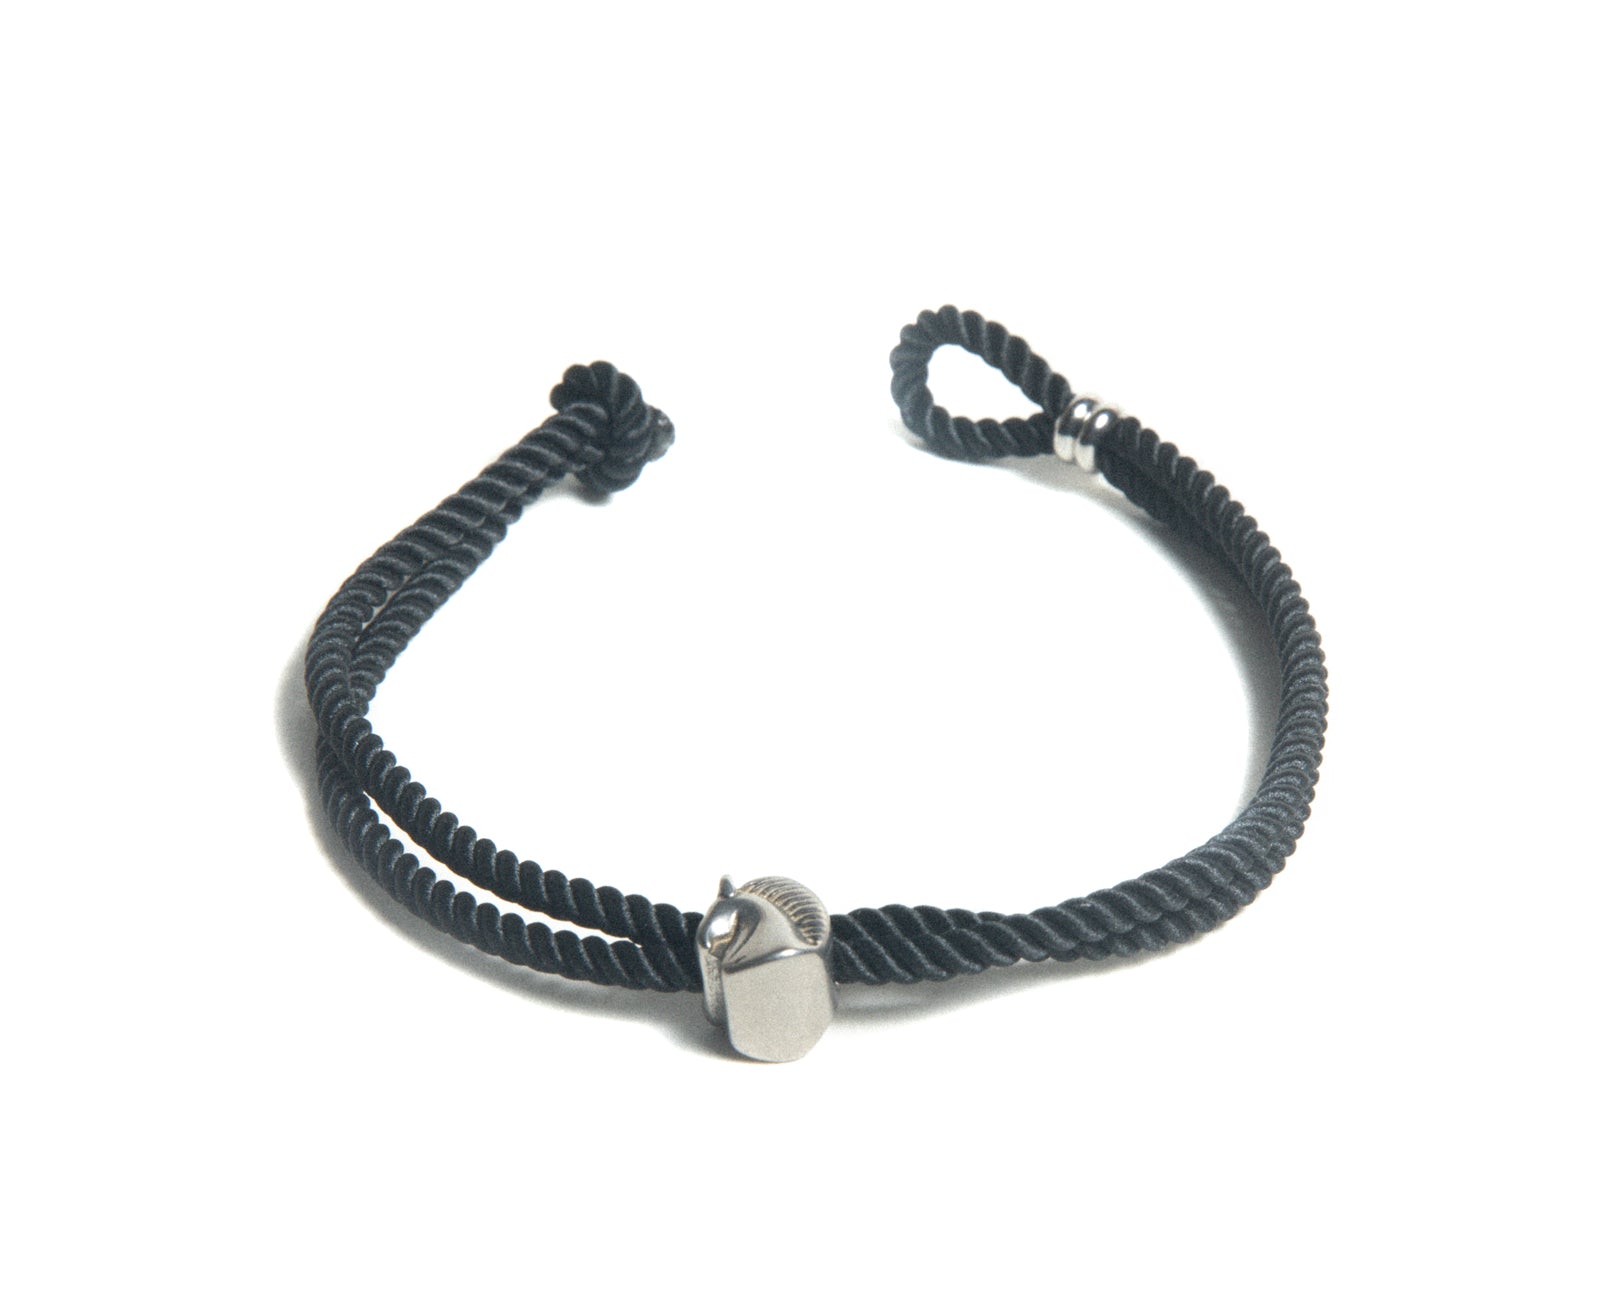 Black Cord Bracelet with horse charm for men at RM Kandy